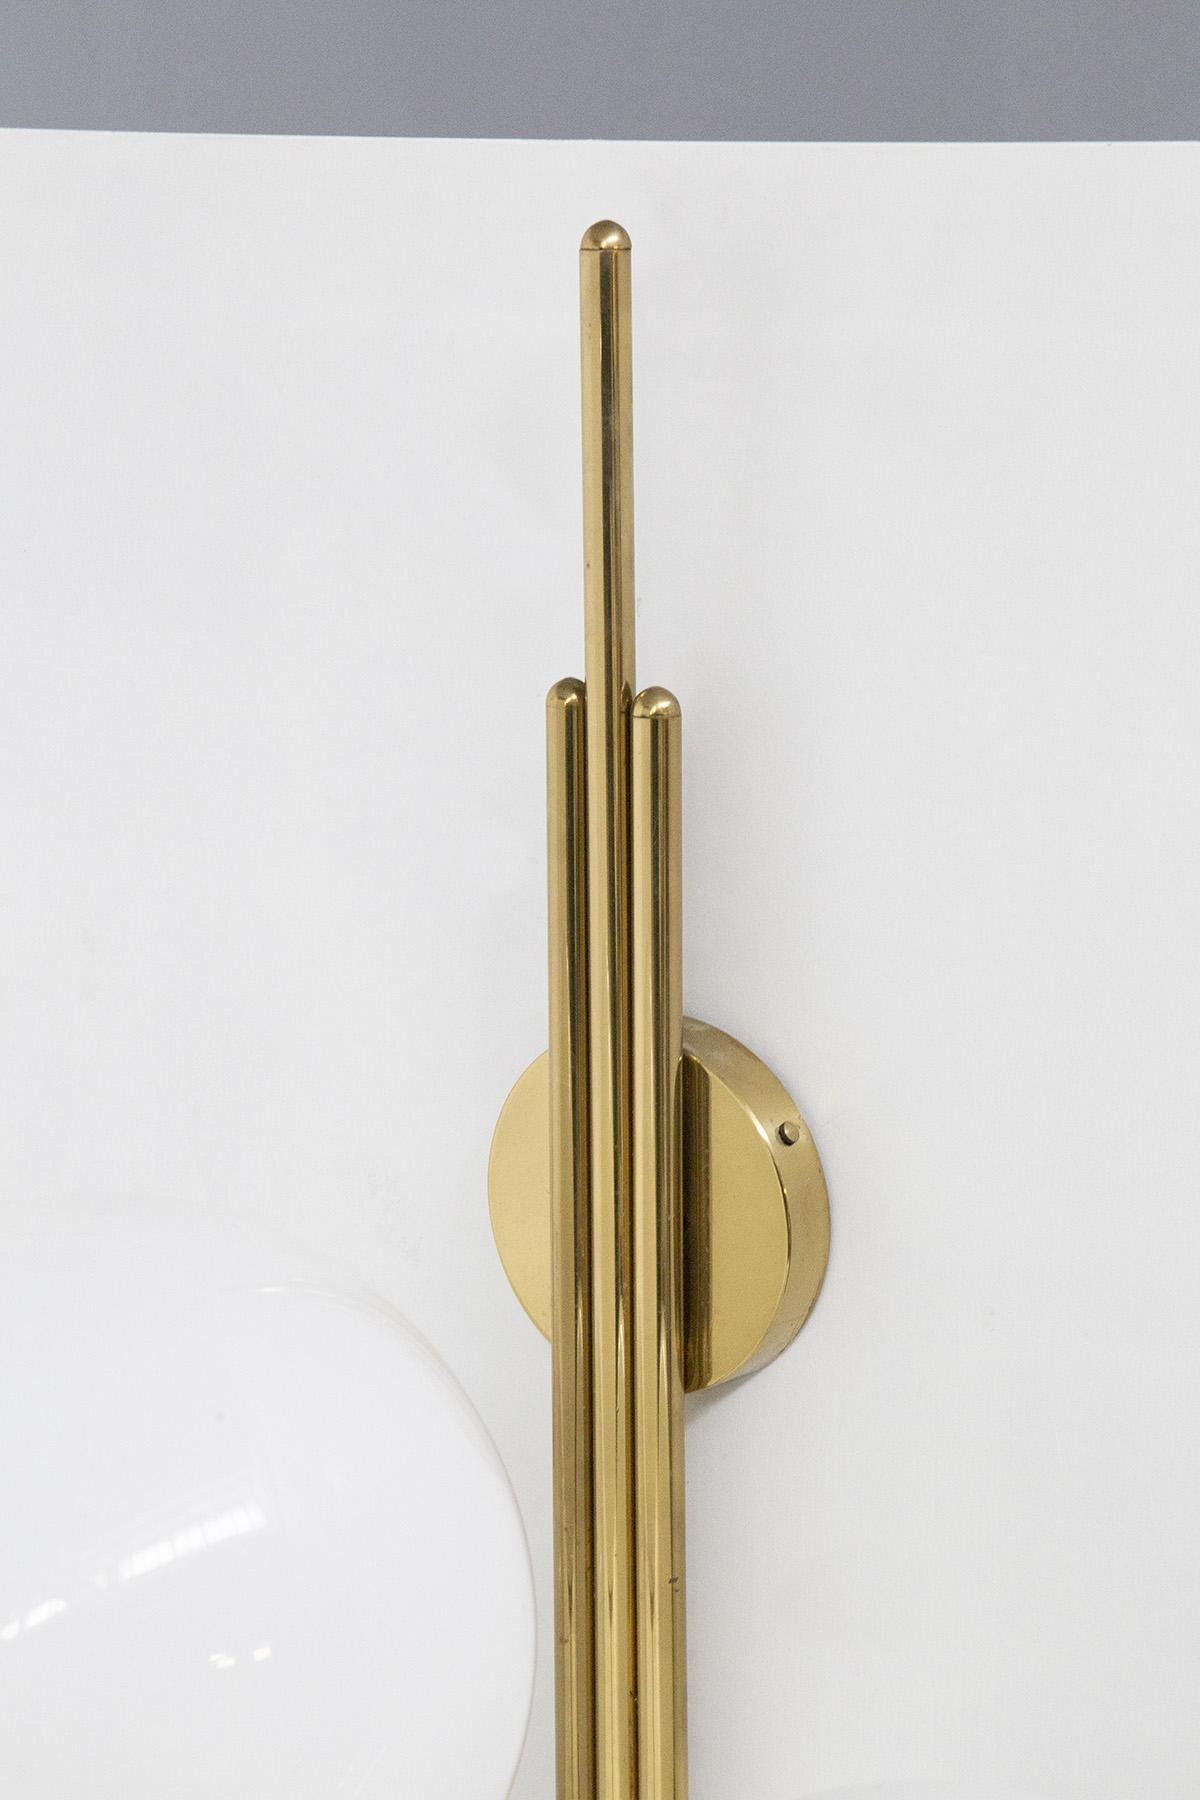 Stunning wall sconce designed by Luigi Caccia Dominioni in the 1950s for the Italian manufacturer Azucena.
The wall sconce has a stem made of beautiful, lustrous golden brass, which is fixed to the wall by means of a round plate. From this spring